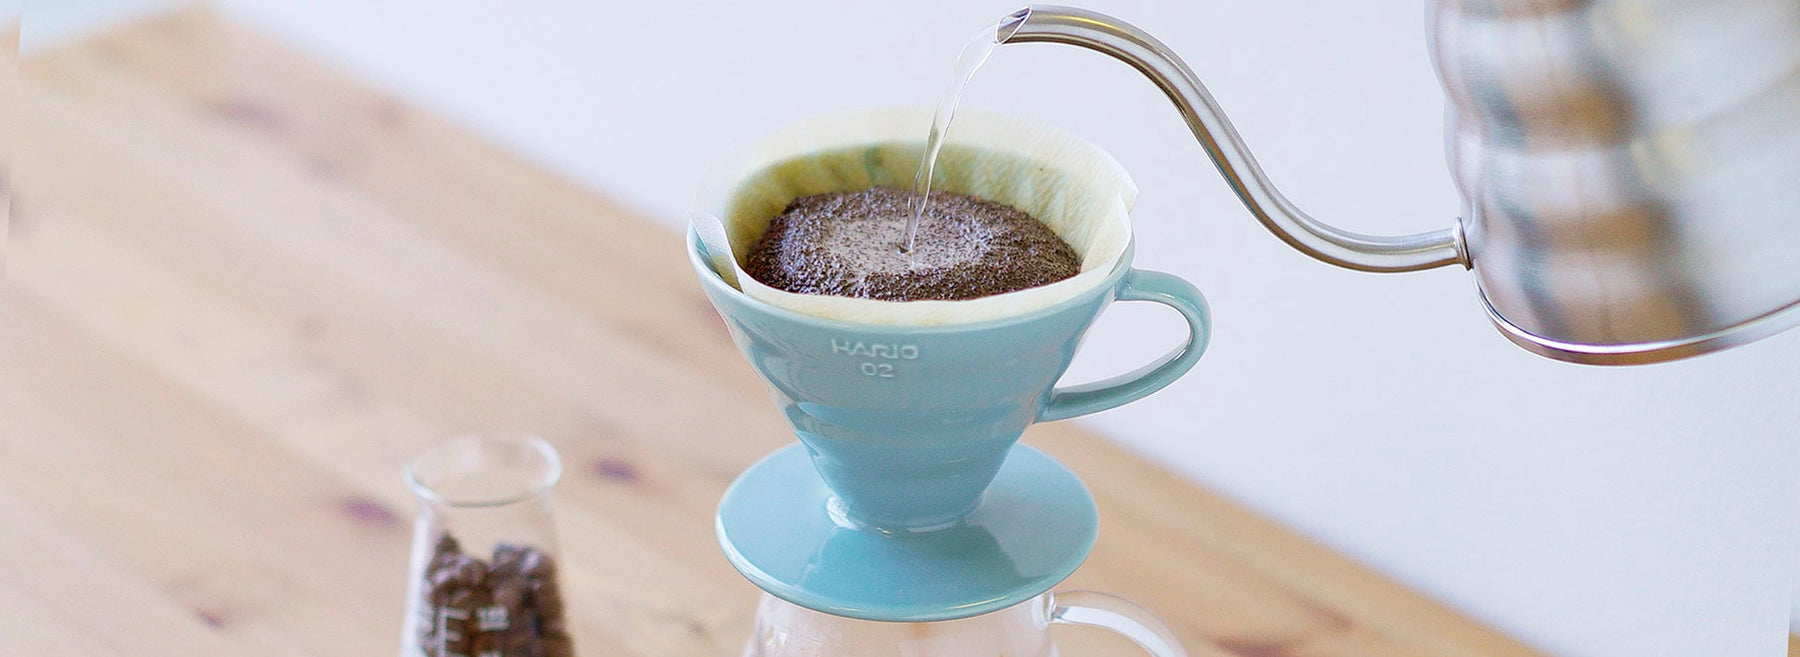 Intro To Best Coffee - The Hario V60 Dripper - Why Own One?